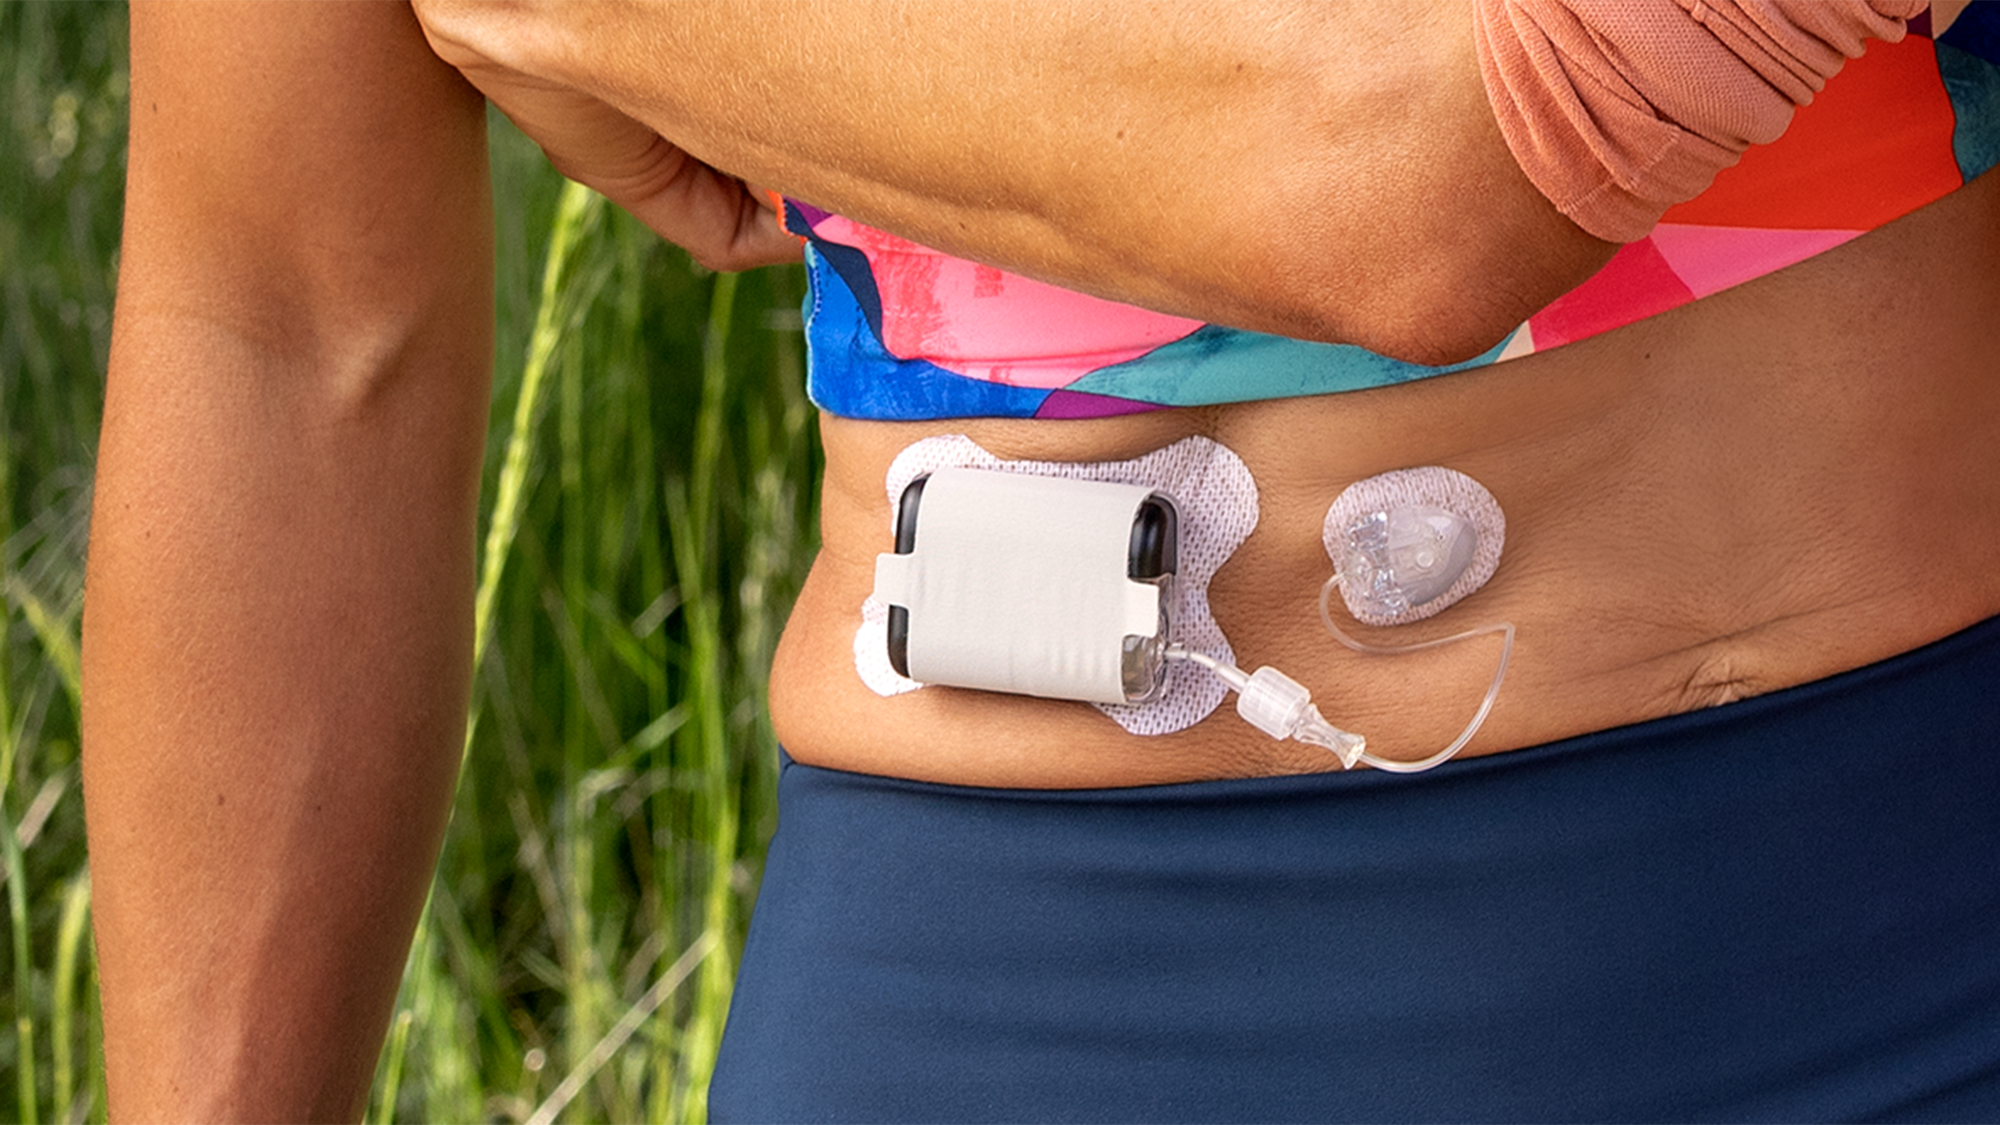 Tandem insulin pump installed on woman's stomach